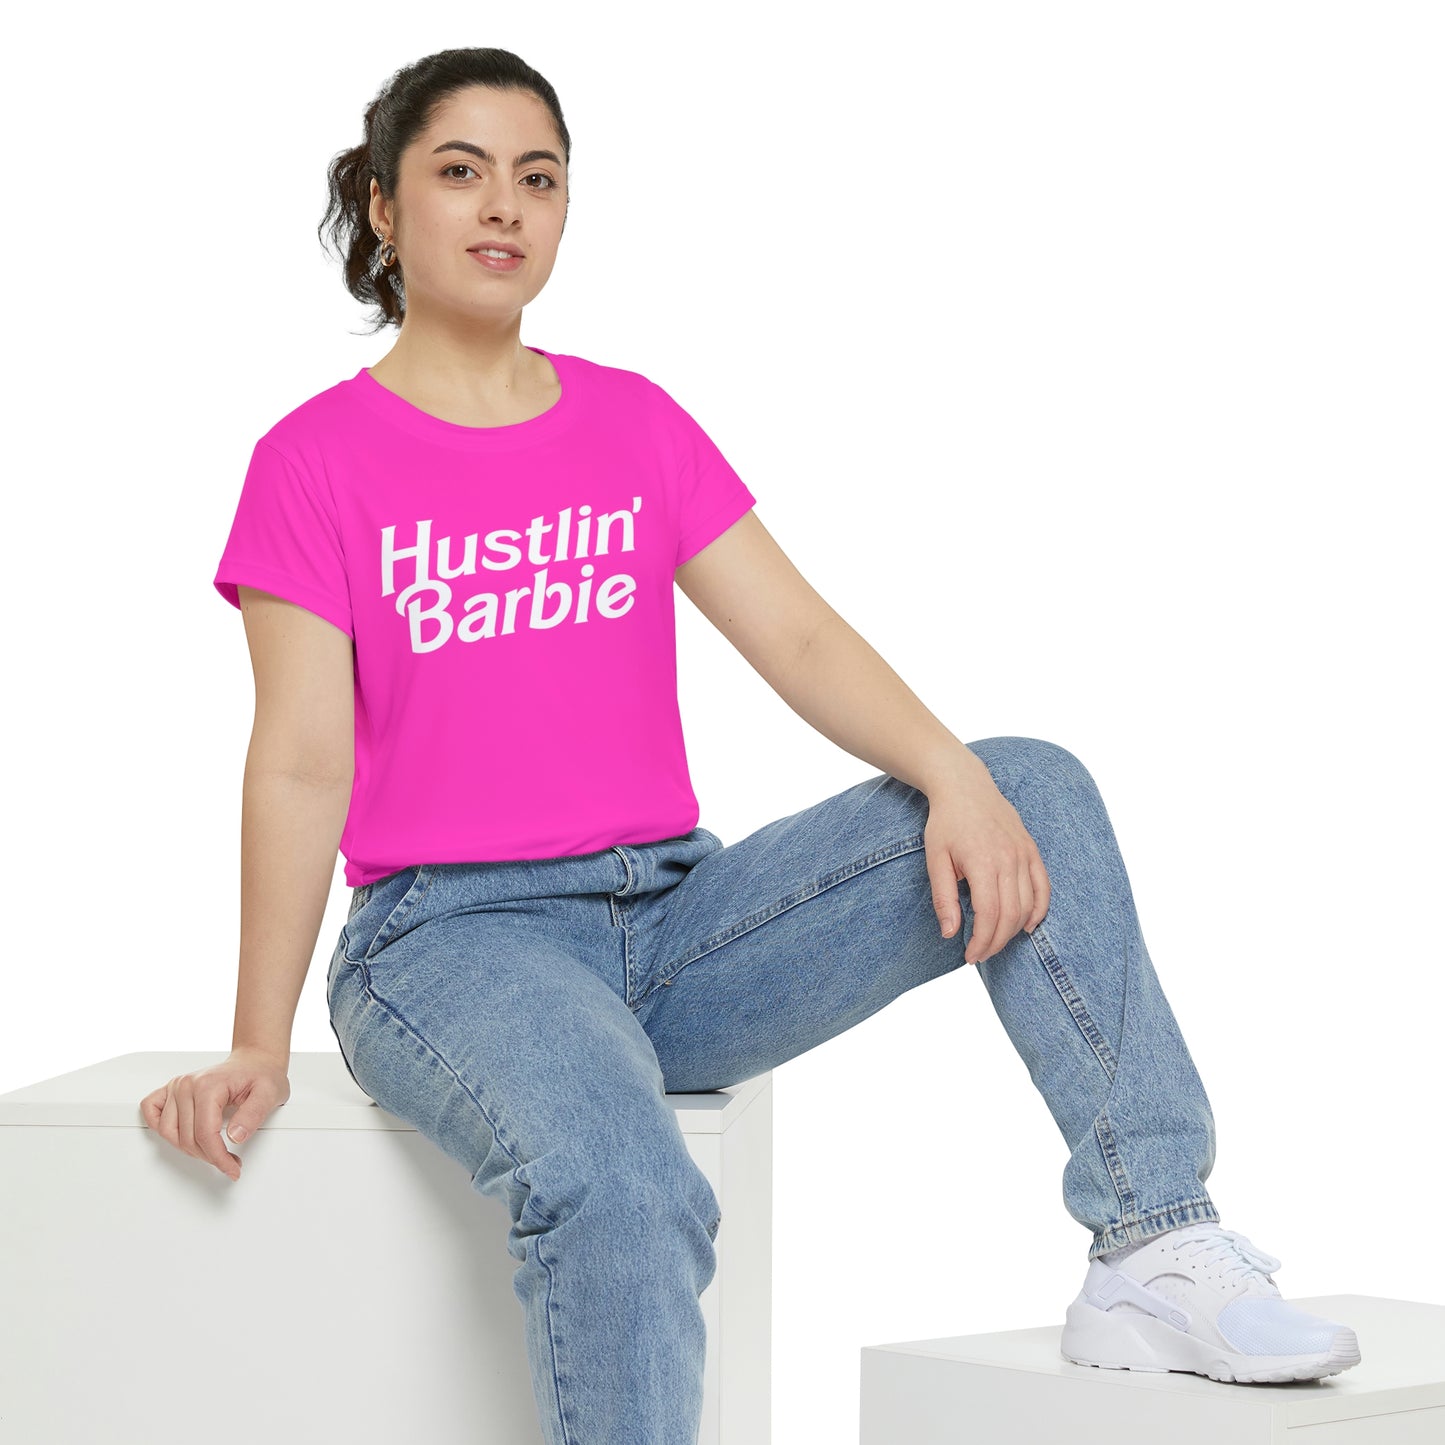 Hustlin' Barbie, Bachelorette Party Shirts, Bridesmaid Gifts, Here comes the Party Tees, Group Party Favor Shirts, Bridal Party Shirt for women